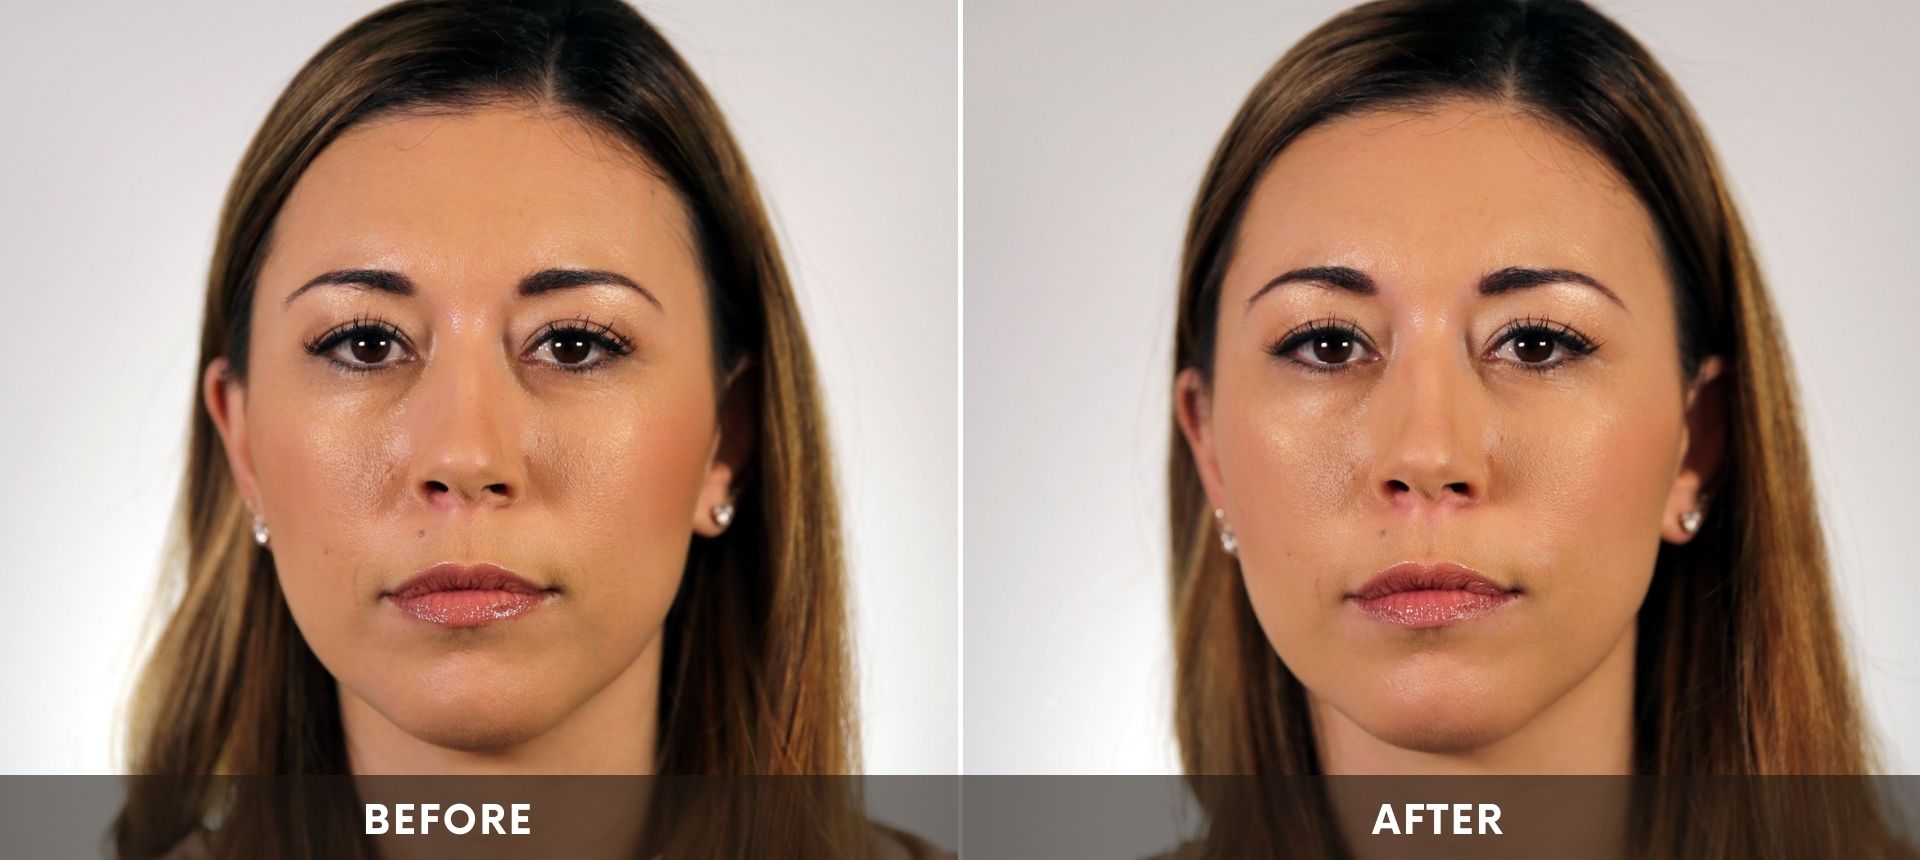 Womans face before and after Revanesse® Versa™ treatment at ABM Wellness in Goldsboro, NC.